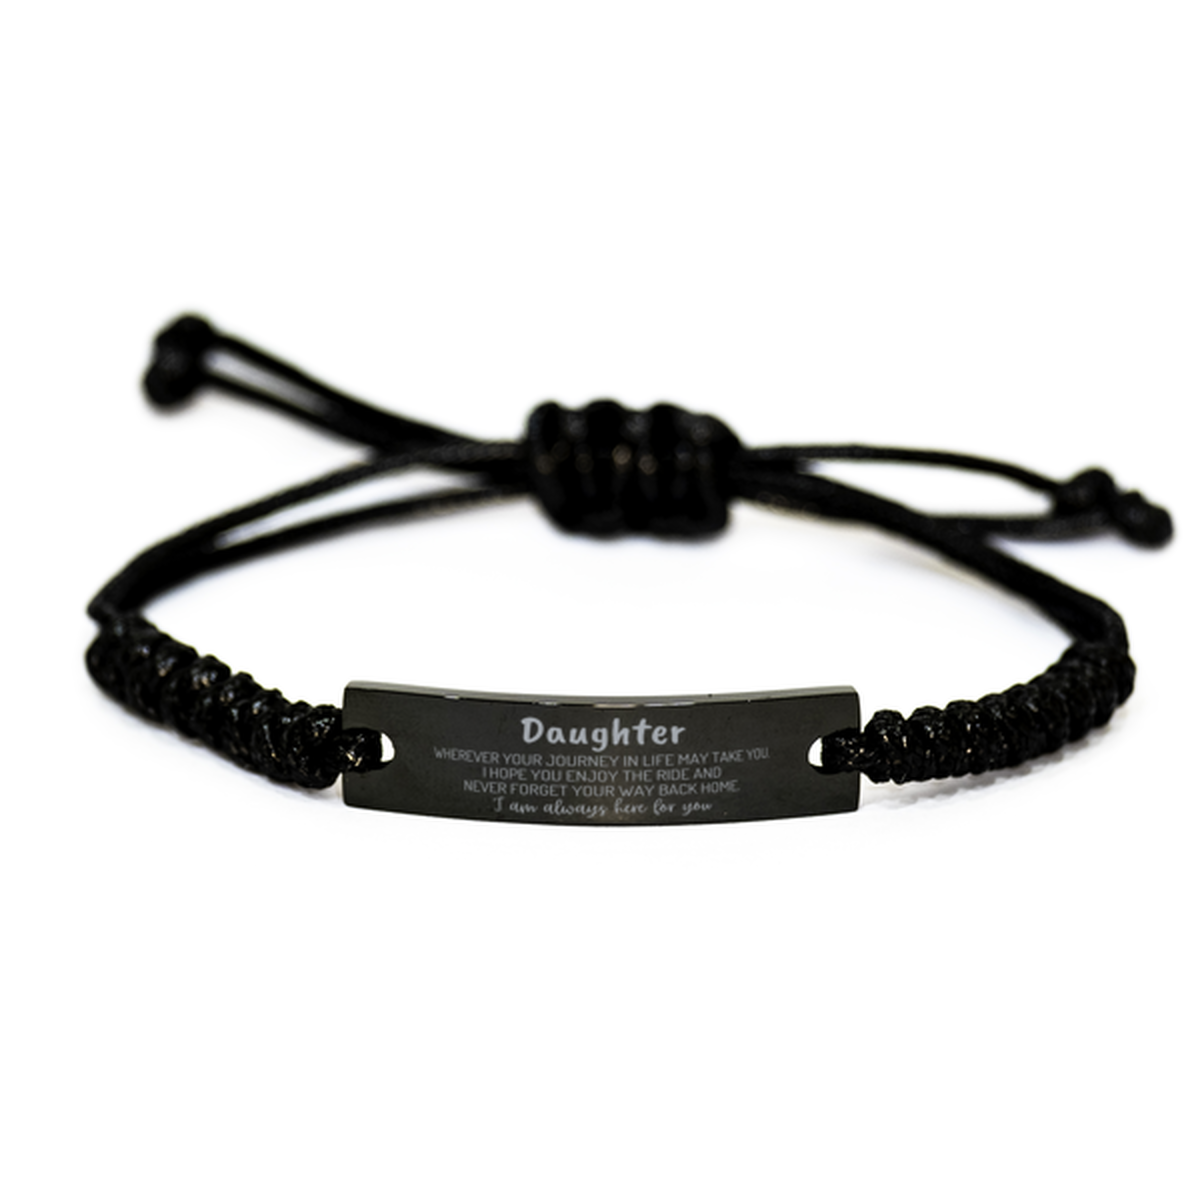 Daughter wherever your journey in life may take you, I am always here for you Daughter Black Rope Bracelet, Awesome Christmas Gifts For Daughter, Daughter Birthday Gifts for Men Women Family Loved One